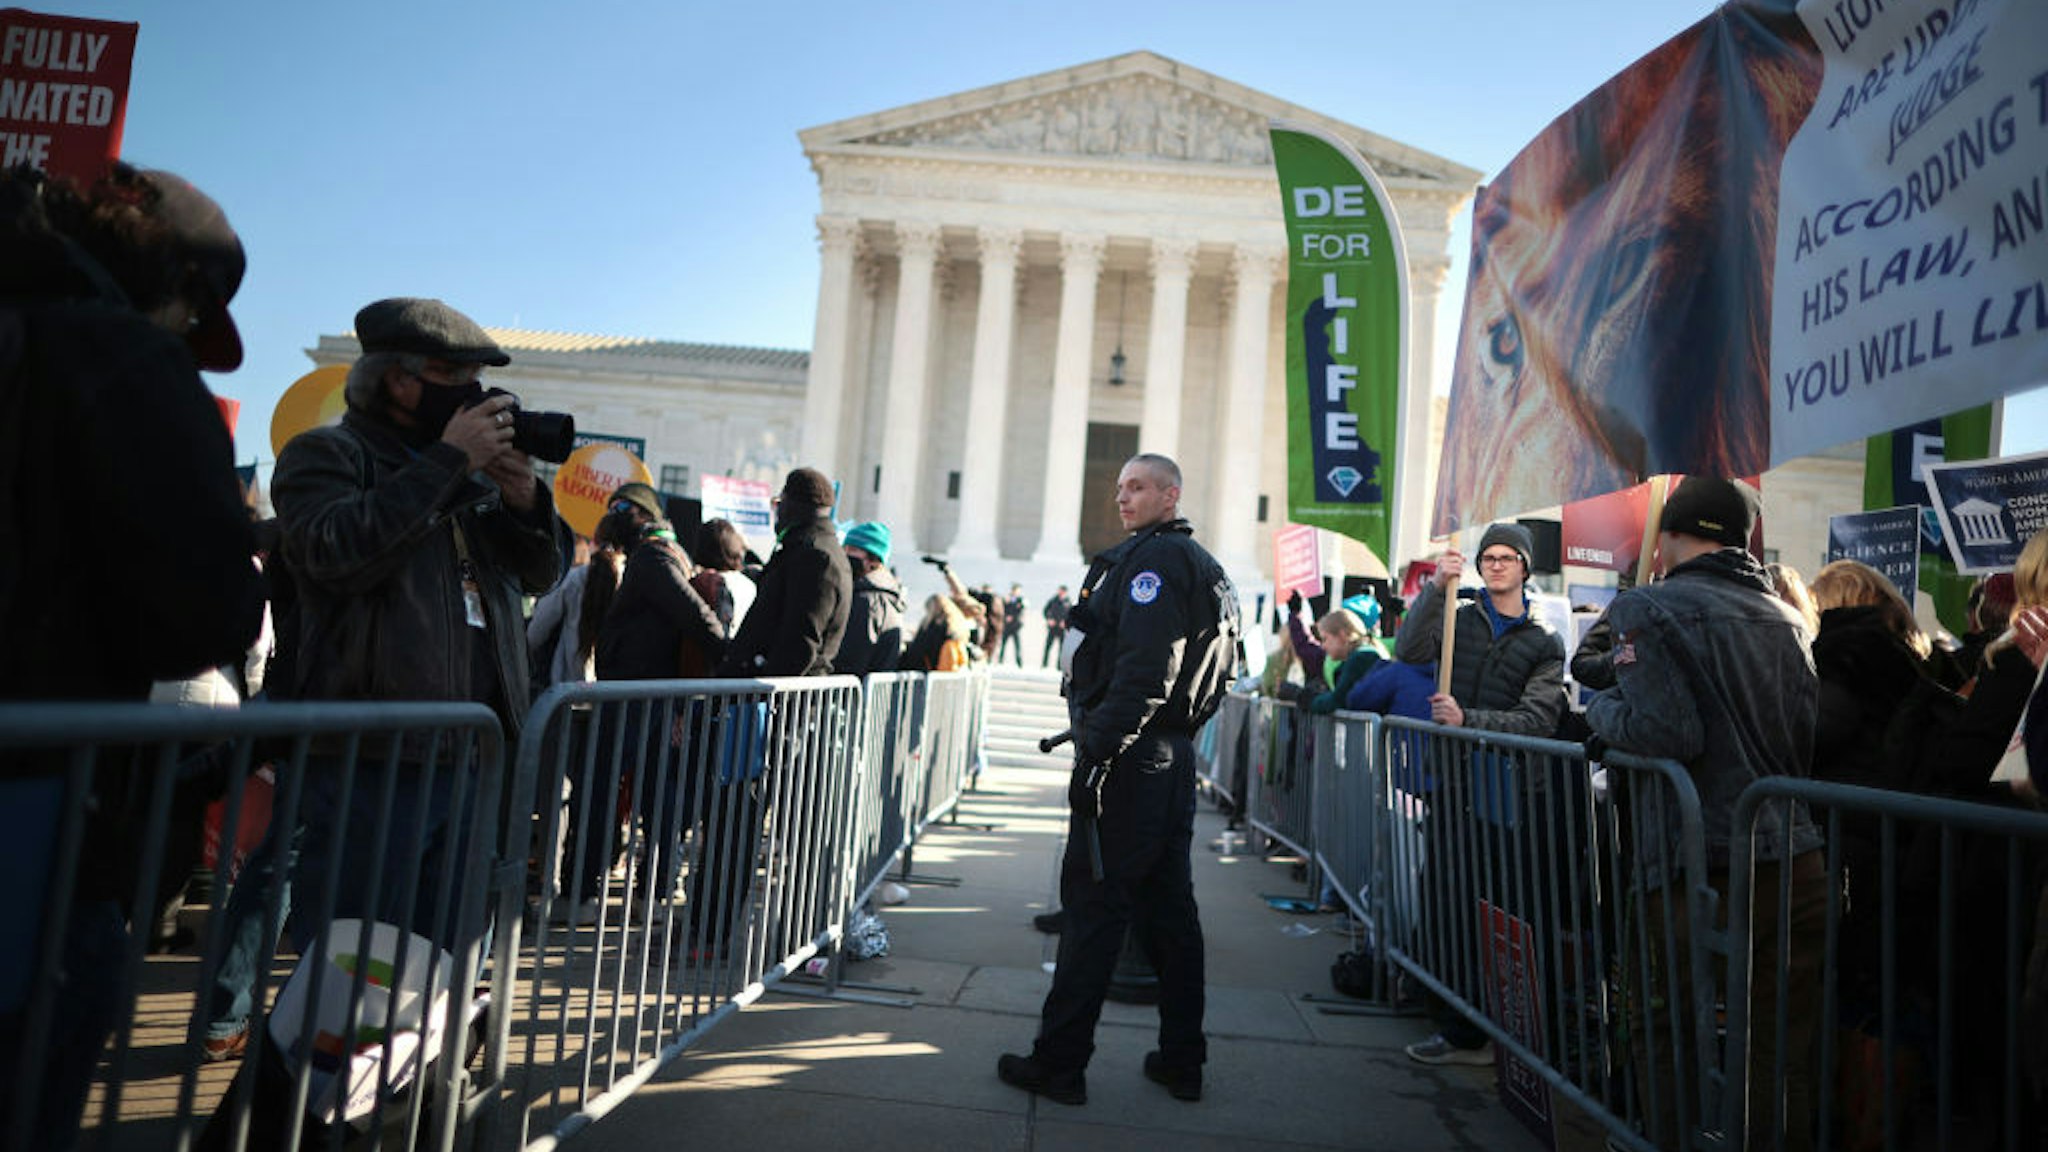 WASHINGTON, DC - DECEMBER 01: Police use metal barricades to keep protesters, demonstrators and activists apart in front of the U.S. Supreme Court as the justices hear hear arguments in Dobbs v. Jackson Women's Health, a case about a Mississippi law that bans most abortions after 15 weeks, on December 01, 2021 in Washington, DC. With the addition of conservative justices to the court by former President Donald Trump, experts believe this could be the most important abortion case in decades and could undermine or overturn Roe v. Wade. (Photo by Chip Somodevilla/Getty Images)